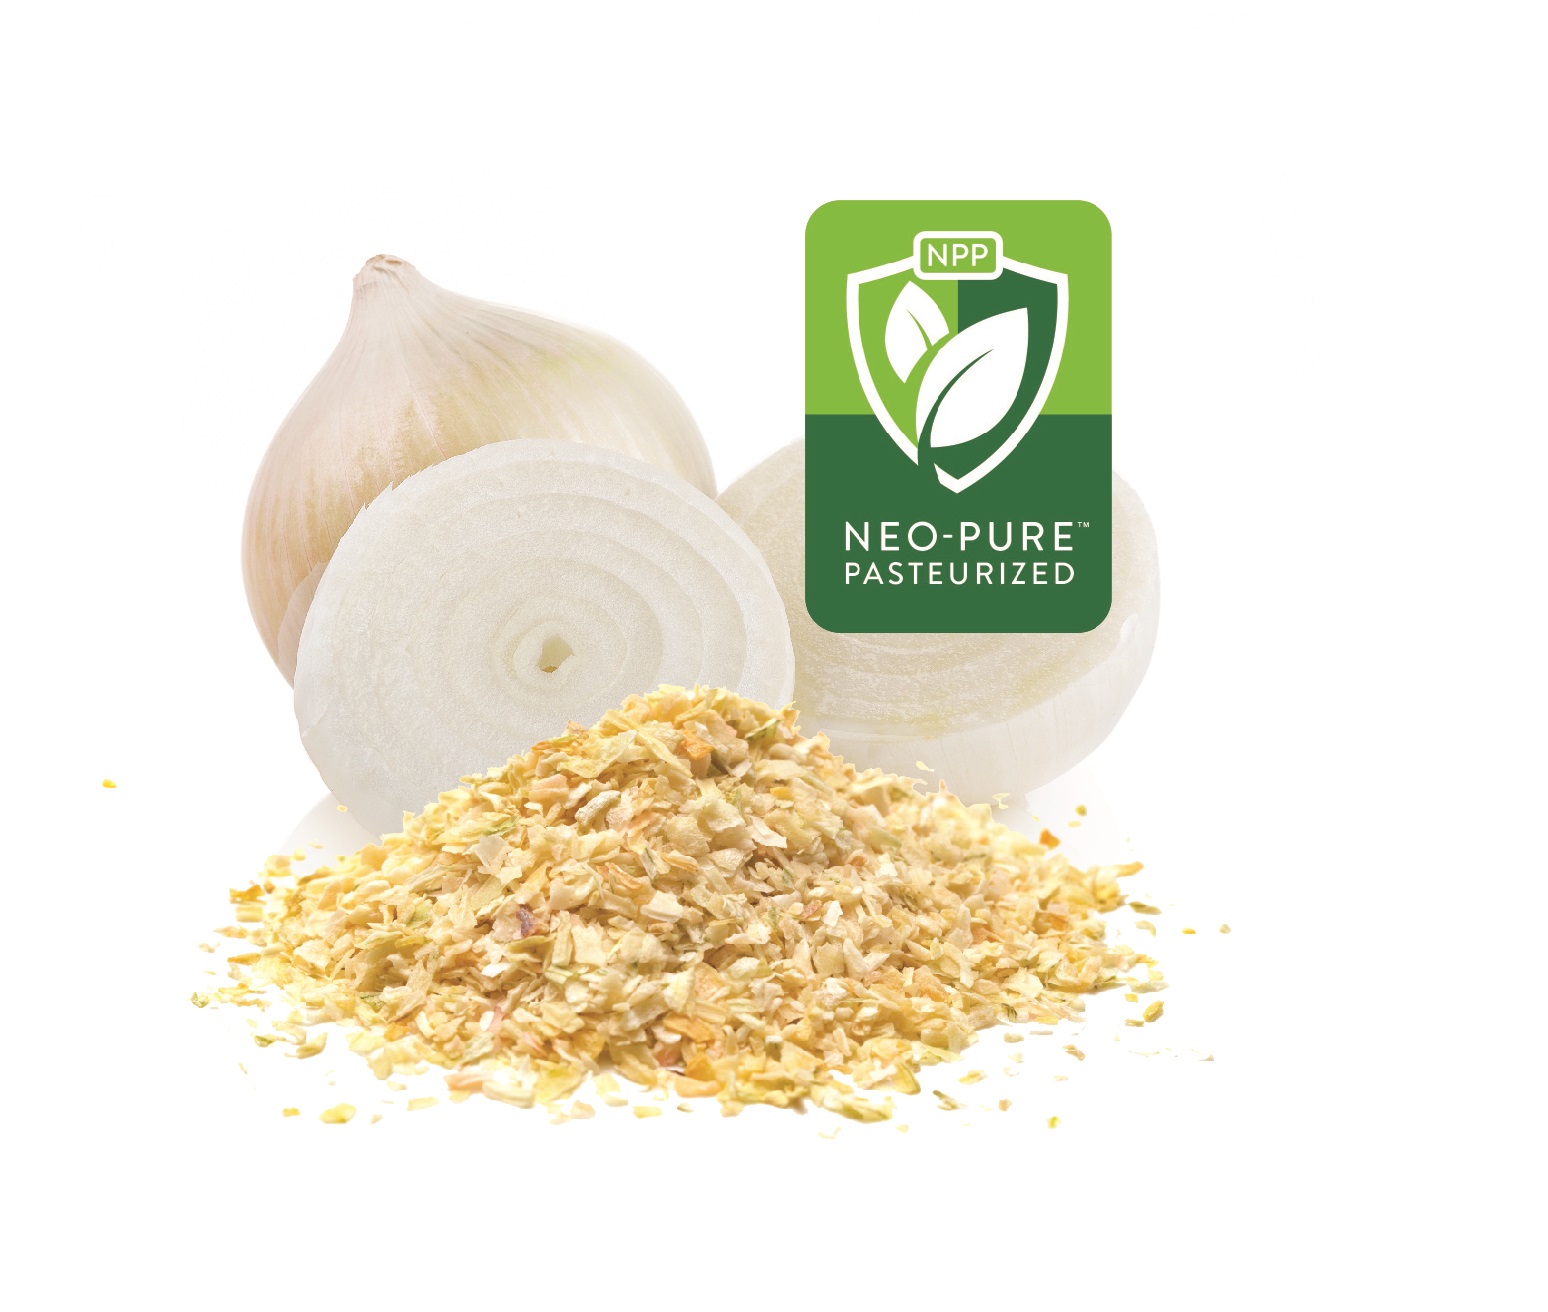 Neo-Pure pasteurized onion powder